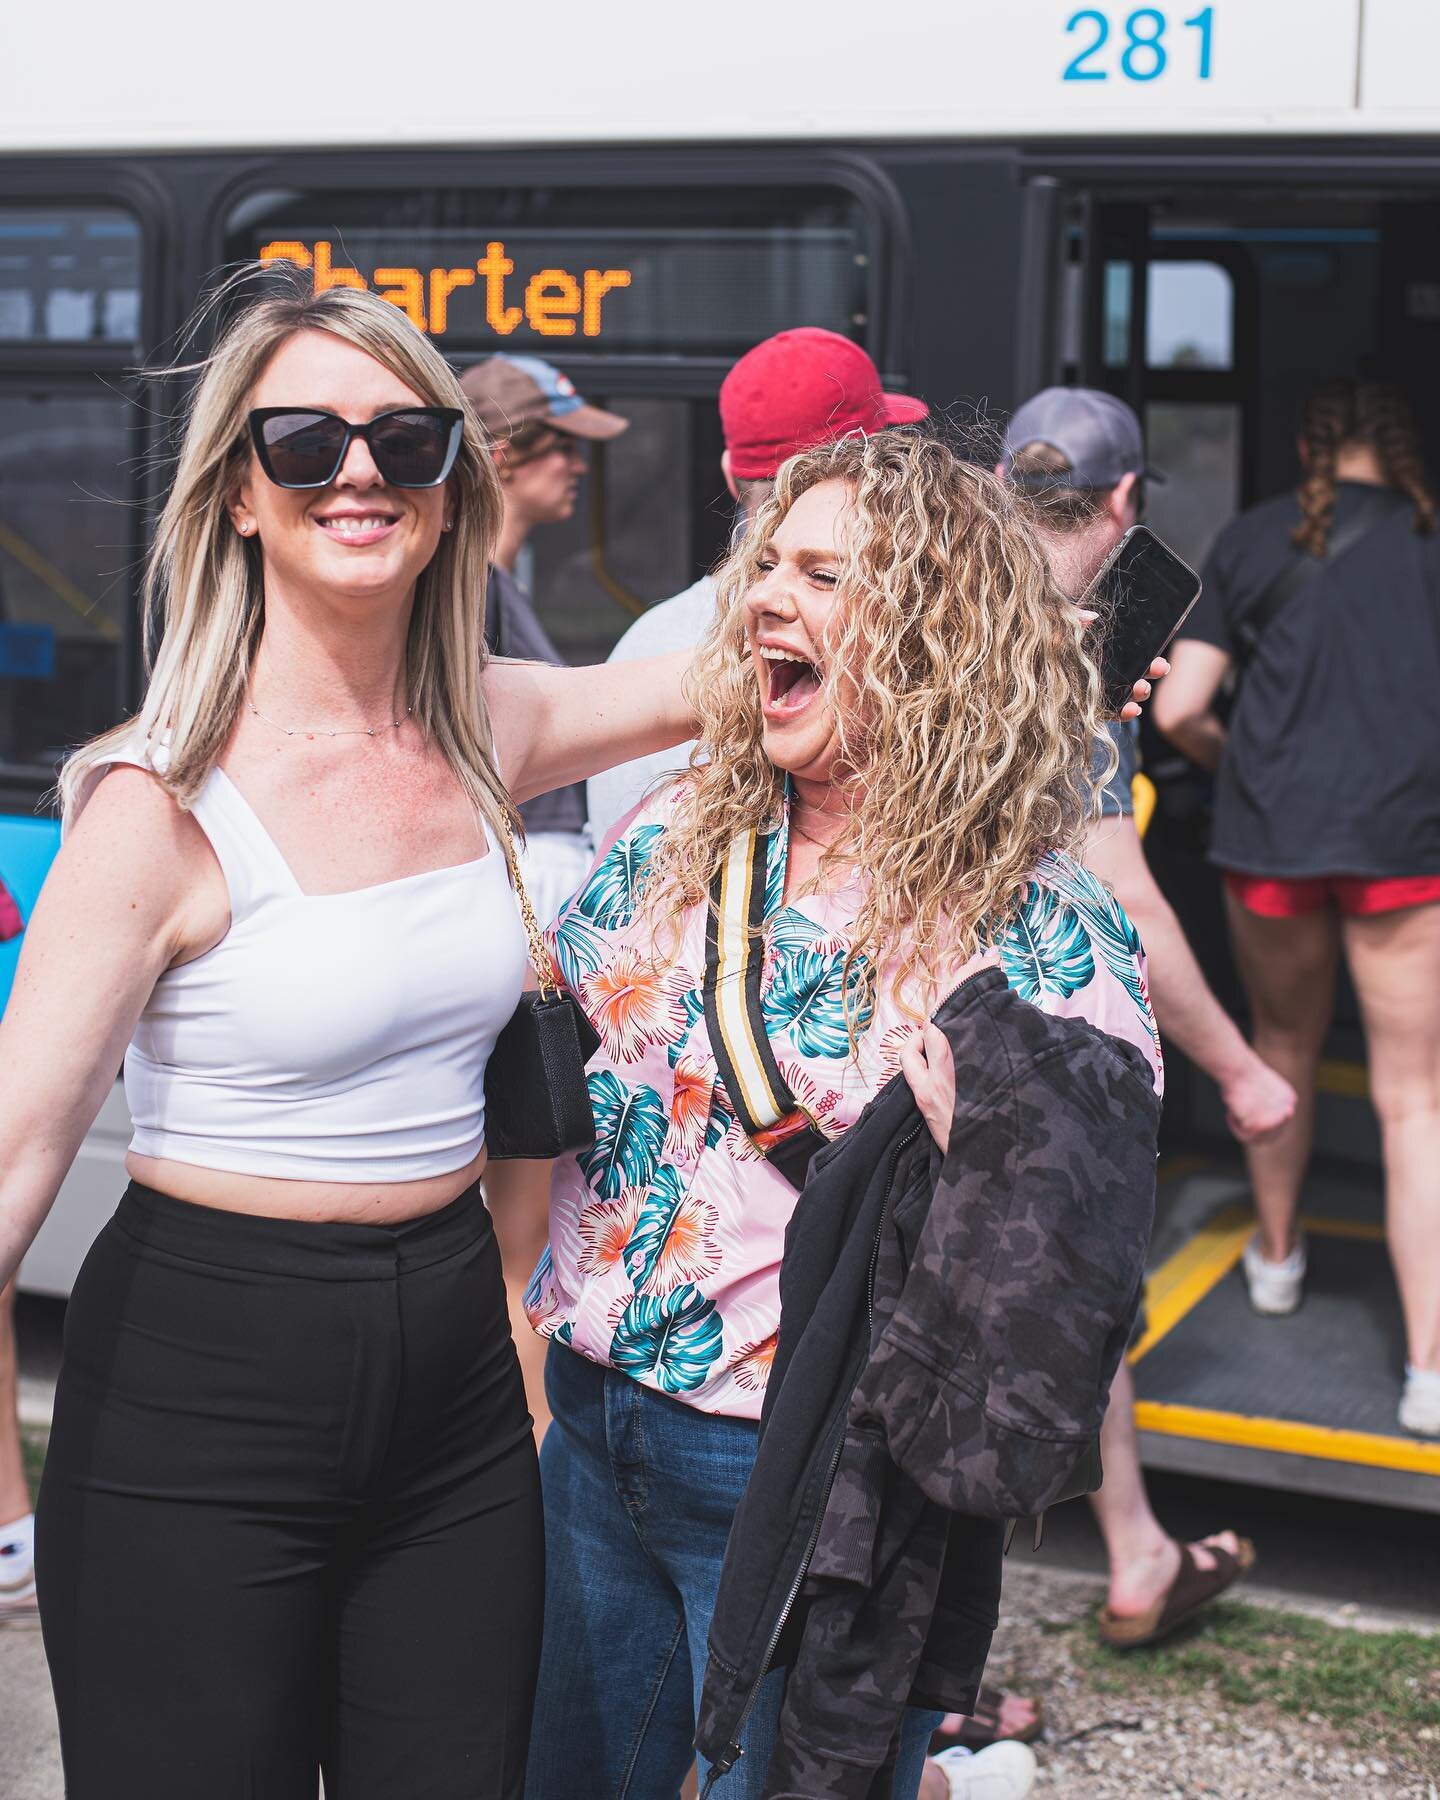 Rode the first Beer Bus of the season and snapped some pics for @guelph.beer 🚌🍻🌞

The Guelph.Beer Bus is really quite a magical thing - a free shuttle that stops at all five of Guelph's breweries; the buses run all day so you can hop on and off at